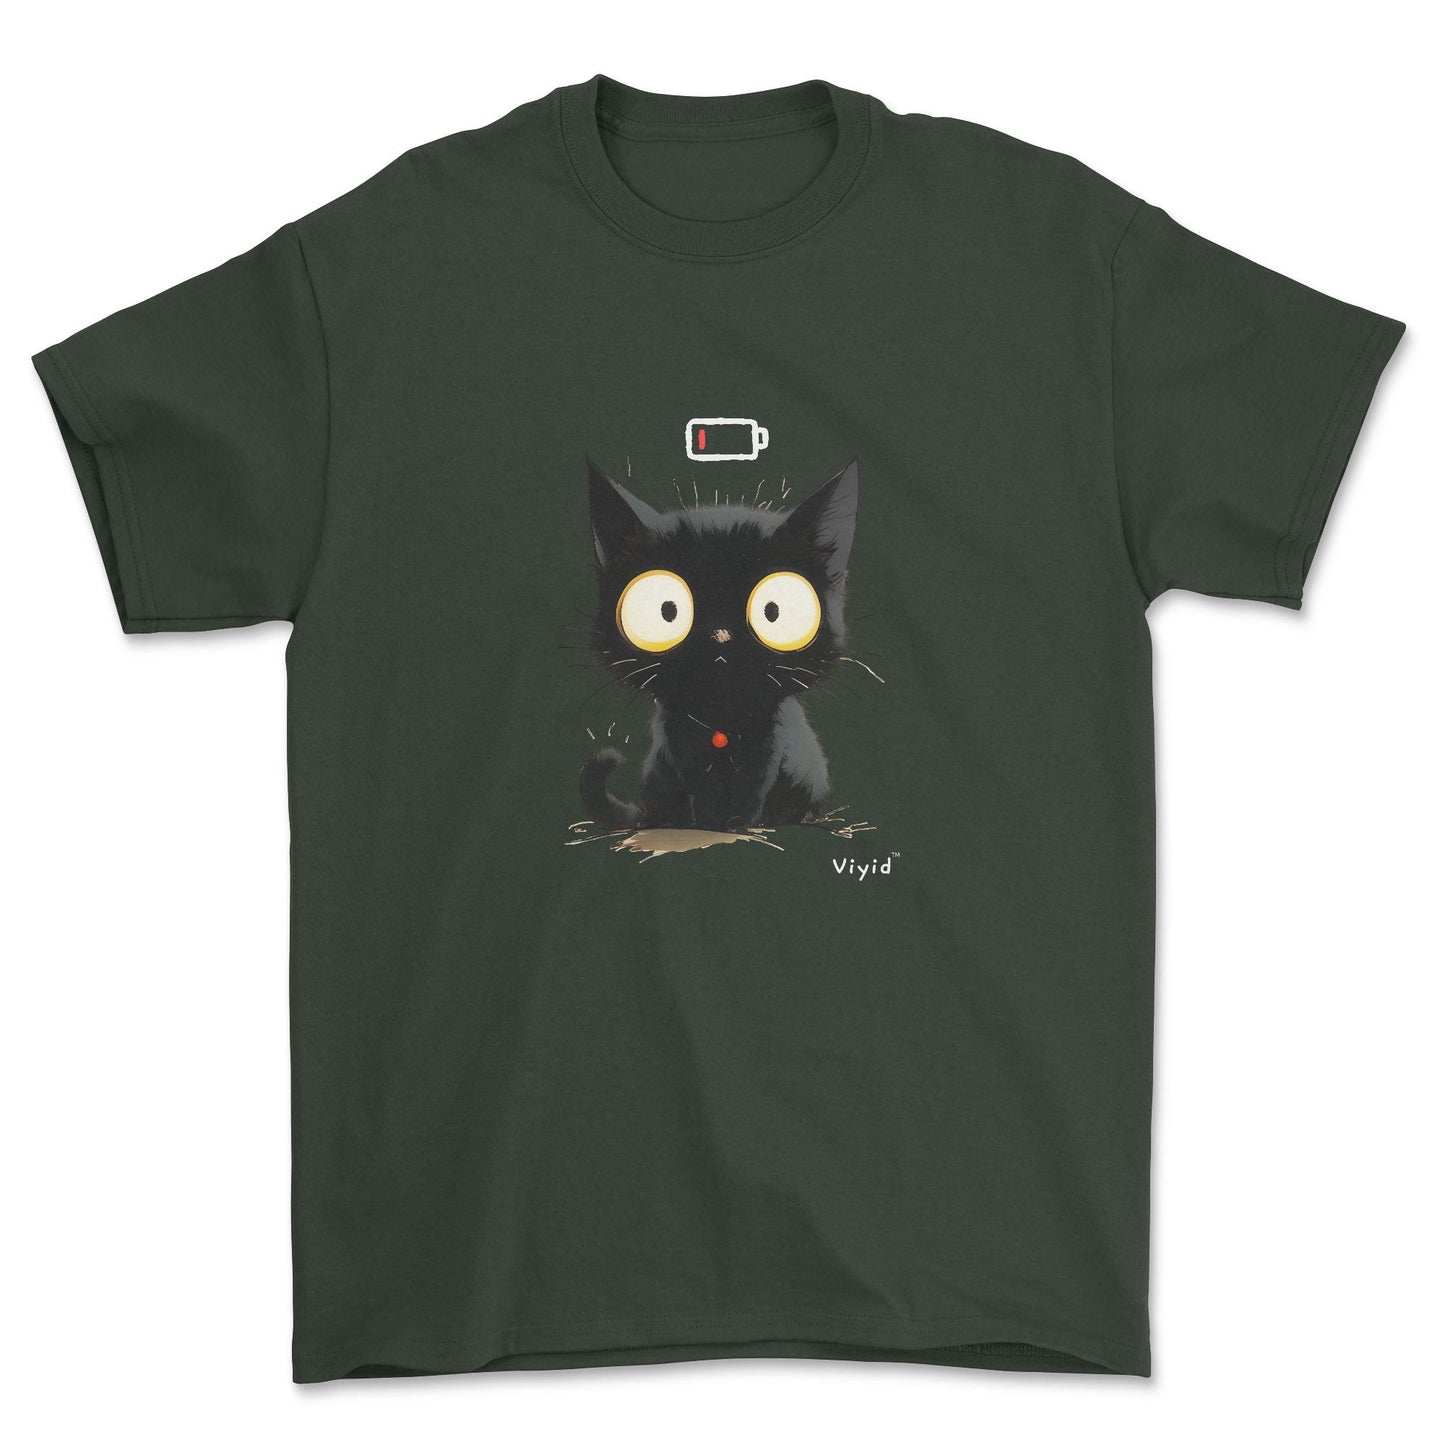 Low battery black cat adult t-shirt forest green